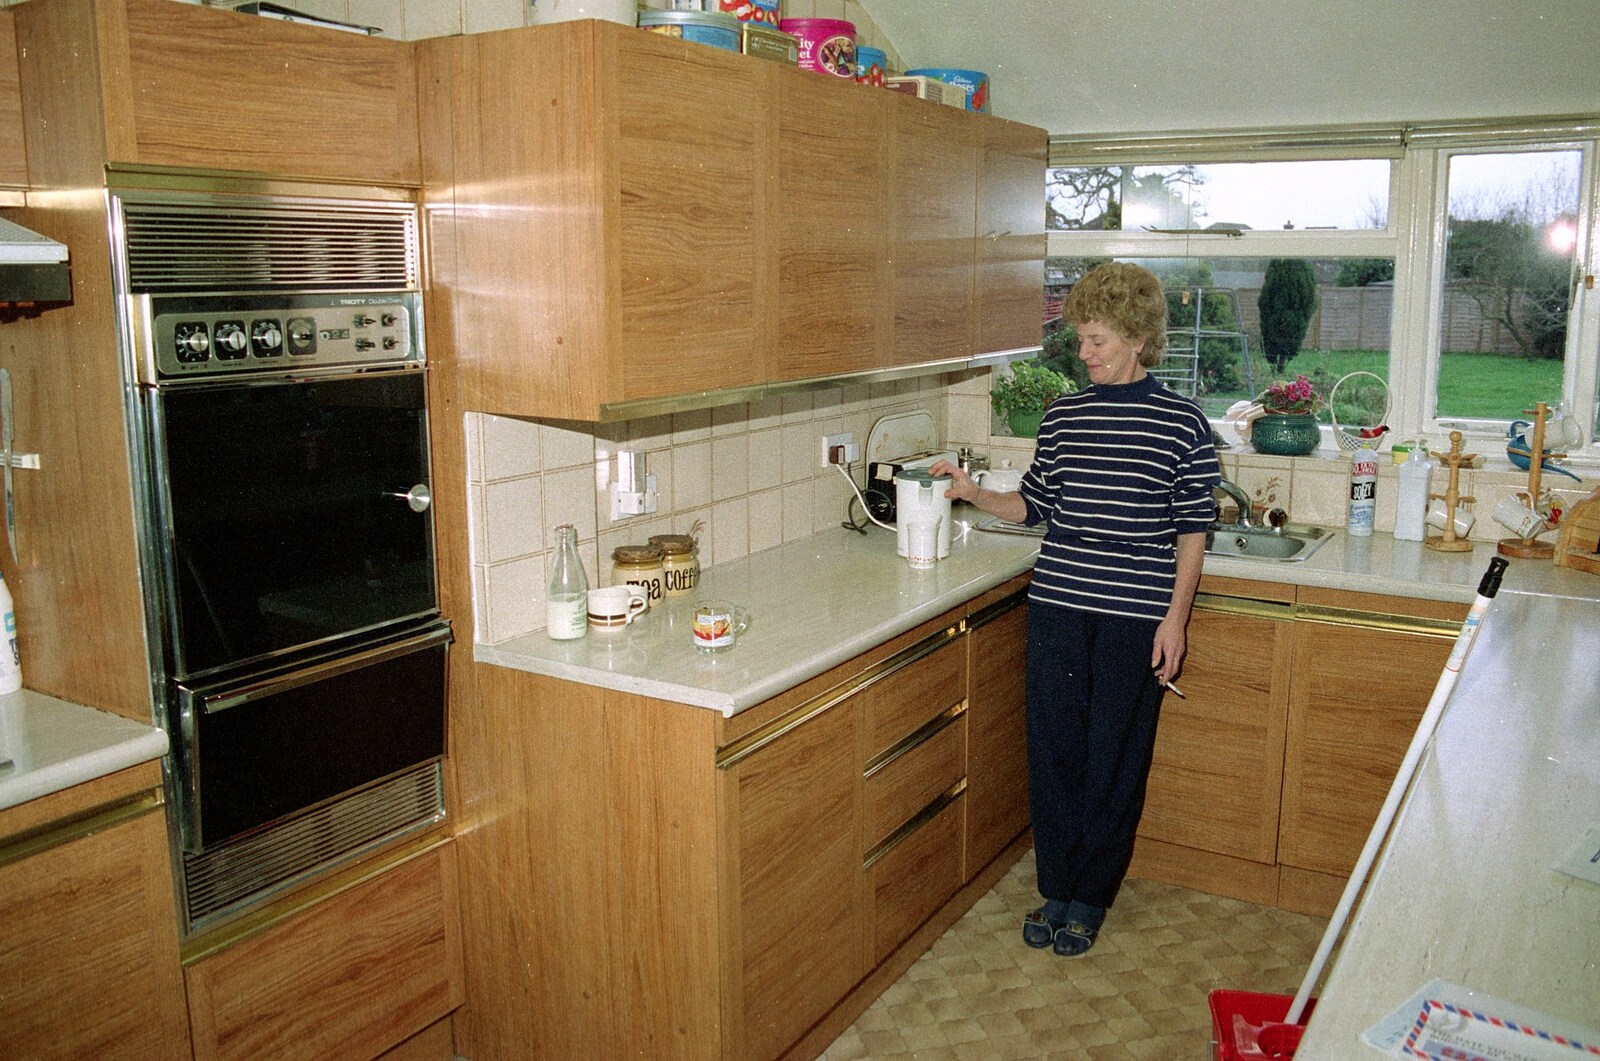 Hamish's mother boils a kettle from Leaving Sewell's Cottages: from Red House to New Milton and Farnborough - 22nd September 1988